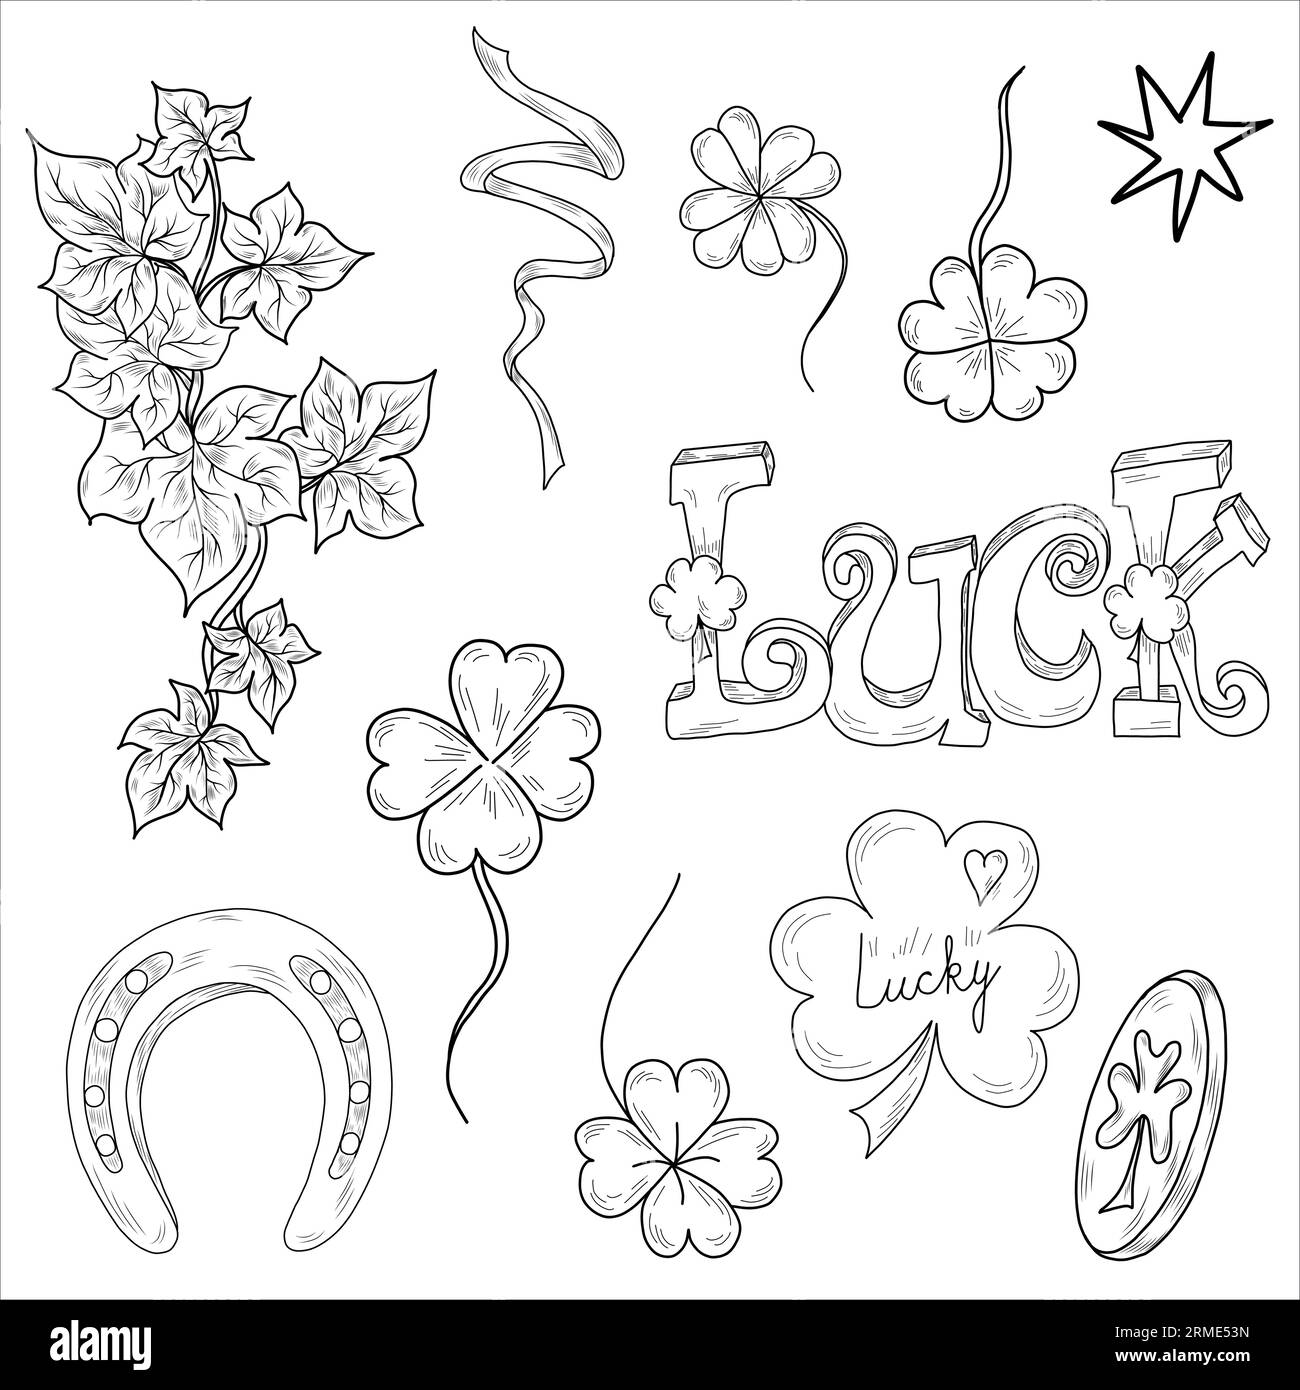 St. Patrick's Day. St. Patrick's Day vector design elements set Stock Vector